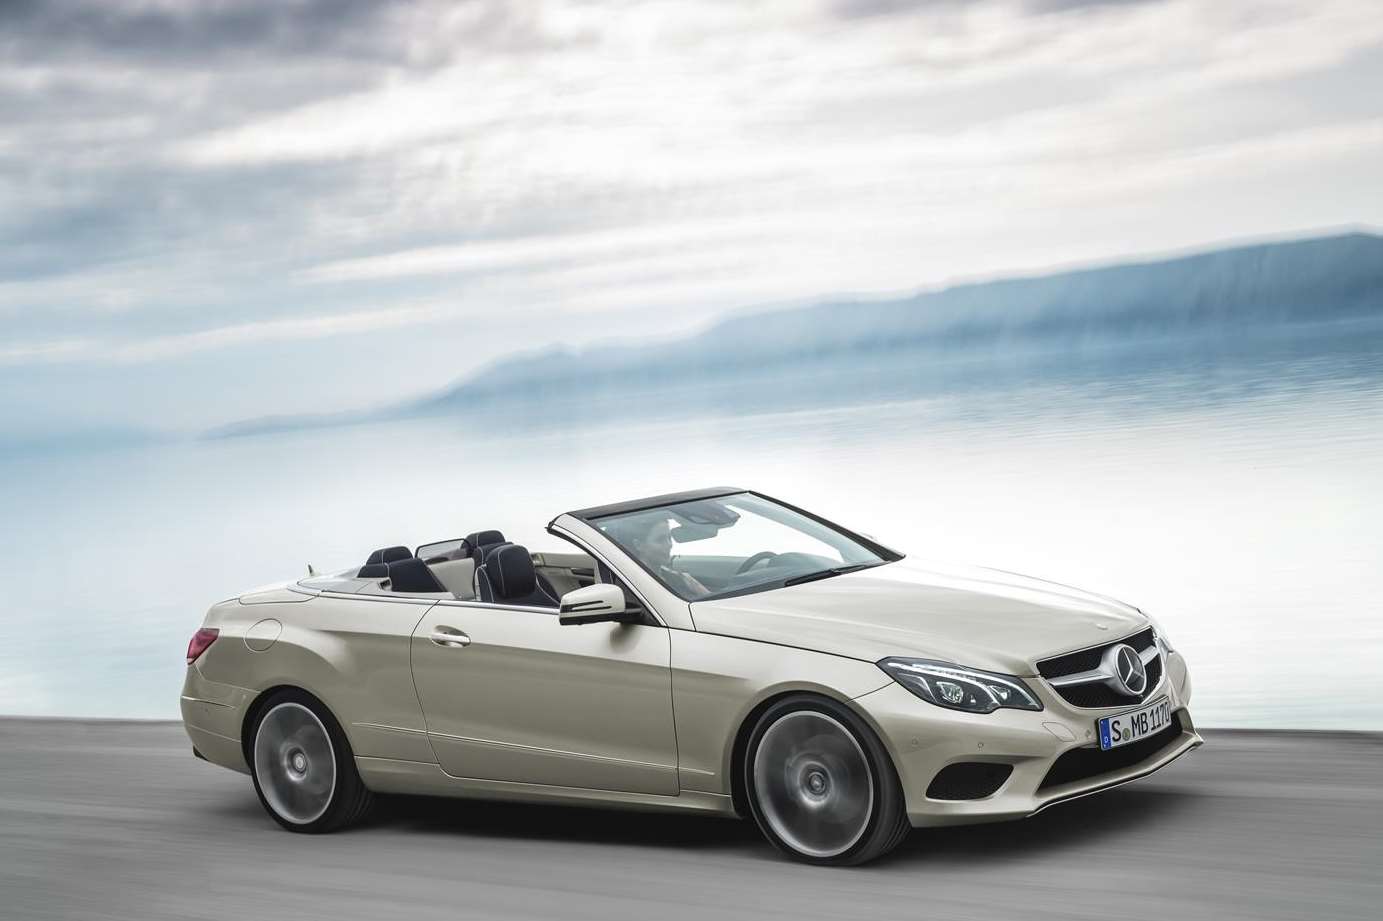 The head-turning E350 Bluetec Cabriolet